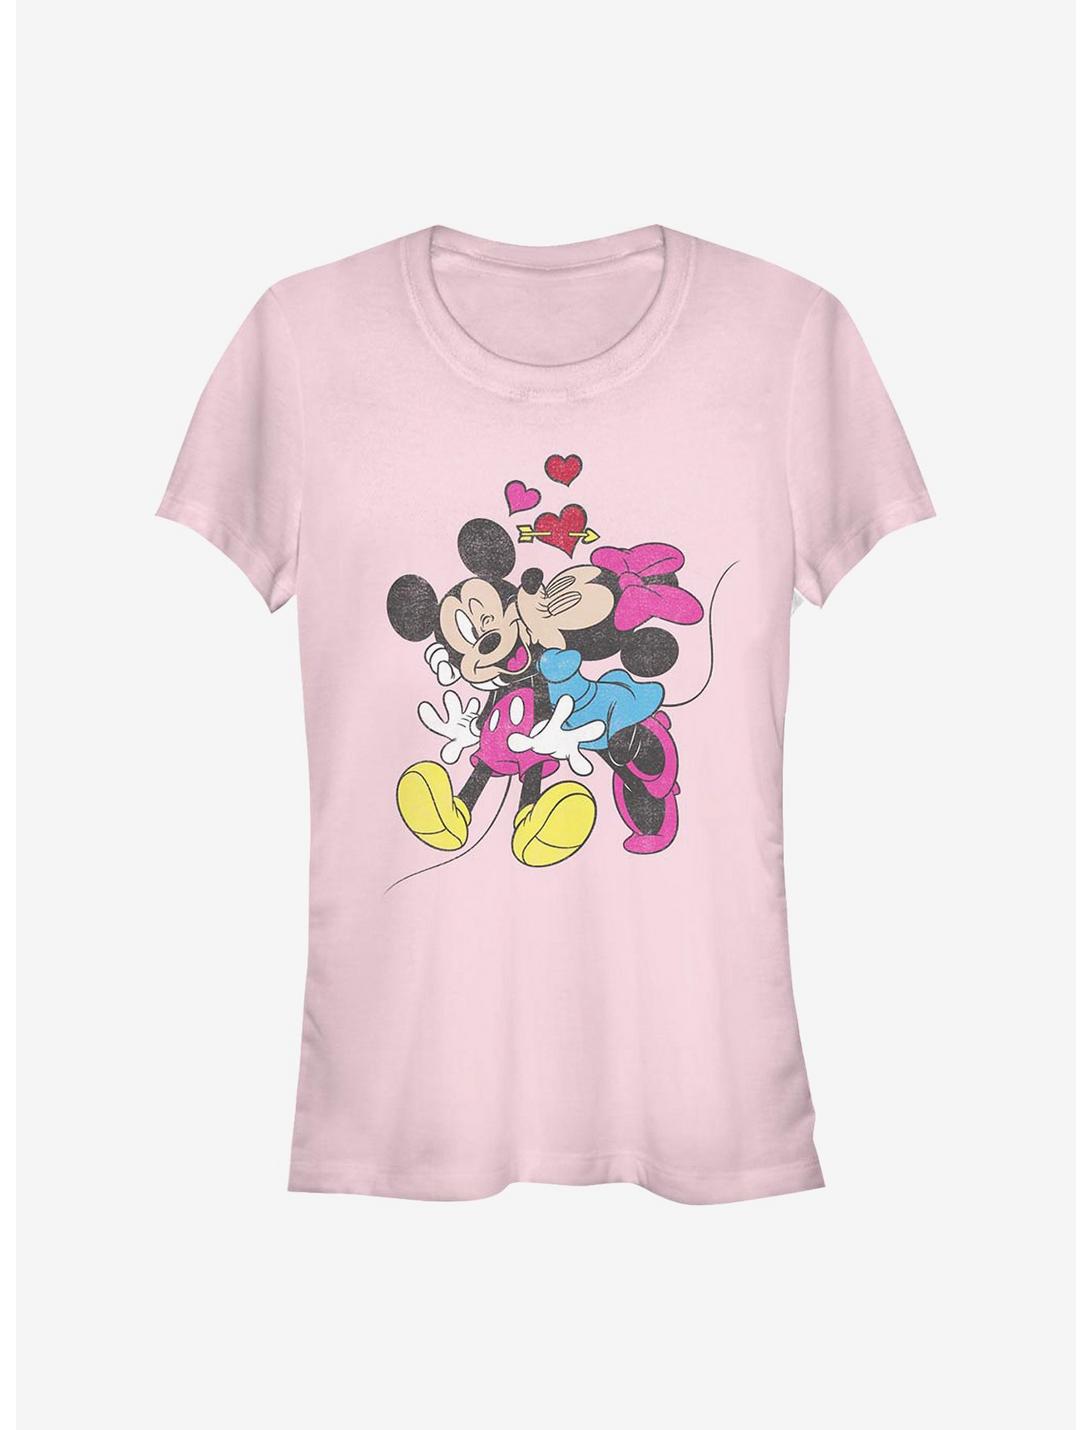 Disney Mickey Mouse & Minnie Mouse Love Girls T-Shirt, LIGHT PINK, hi-res